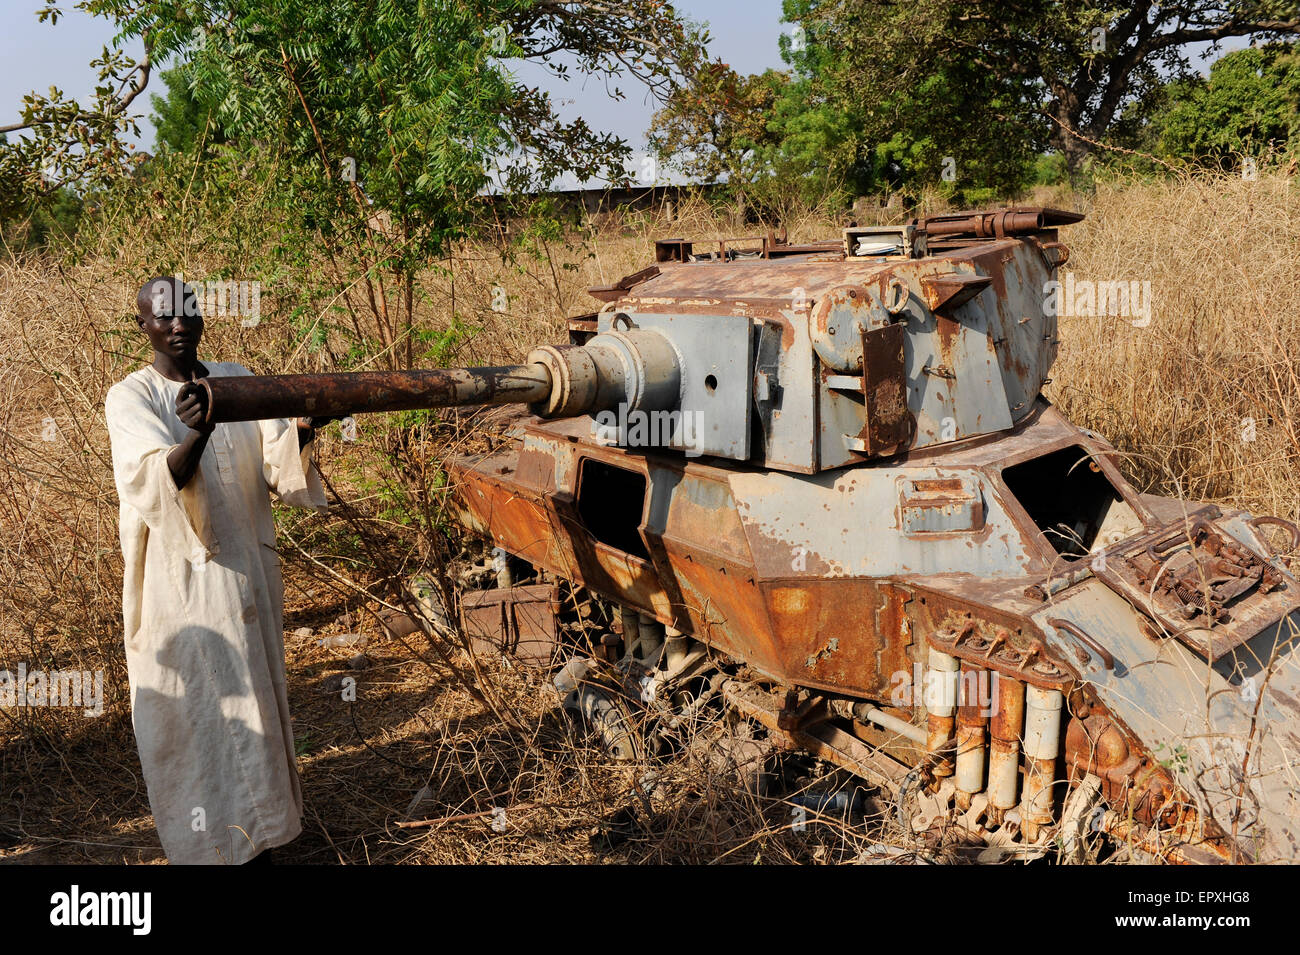 South Sudan, Lakes state, Rumbek, wreck of six-wheeled armoured car FV601 Saladin, manufactured by Alvis factory in Coventry, UK, the tank was captured by south-sudanese liberation army SLPA from the Sudanese Armed Forces SAF during Second Sudanese Civil War from 1983 to 2005 Stock Photo